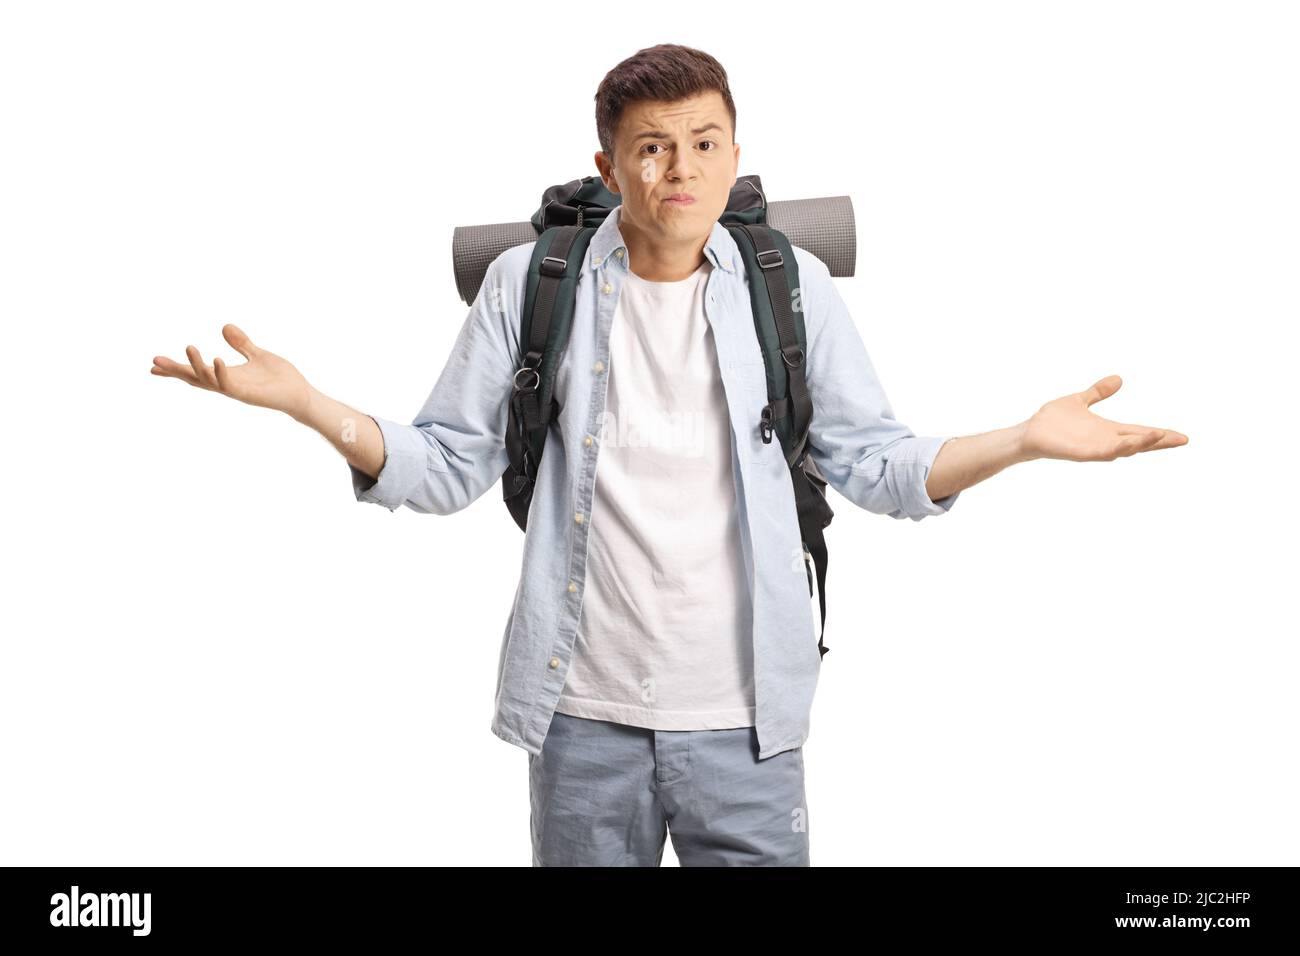 Confused young male backpacker gesturing with hands isolated on white background Stock Photo